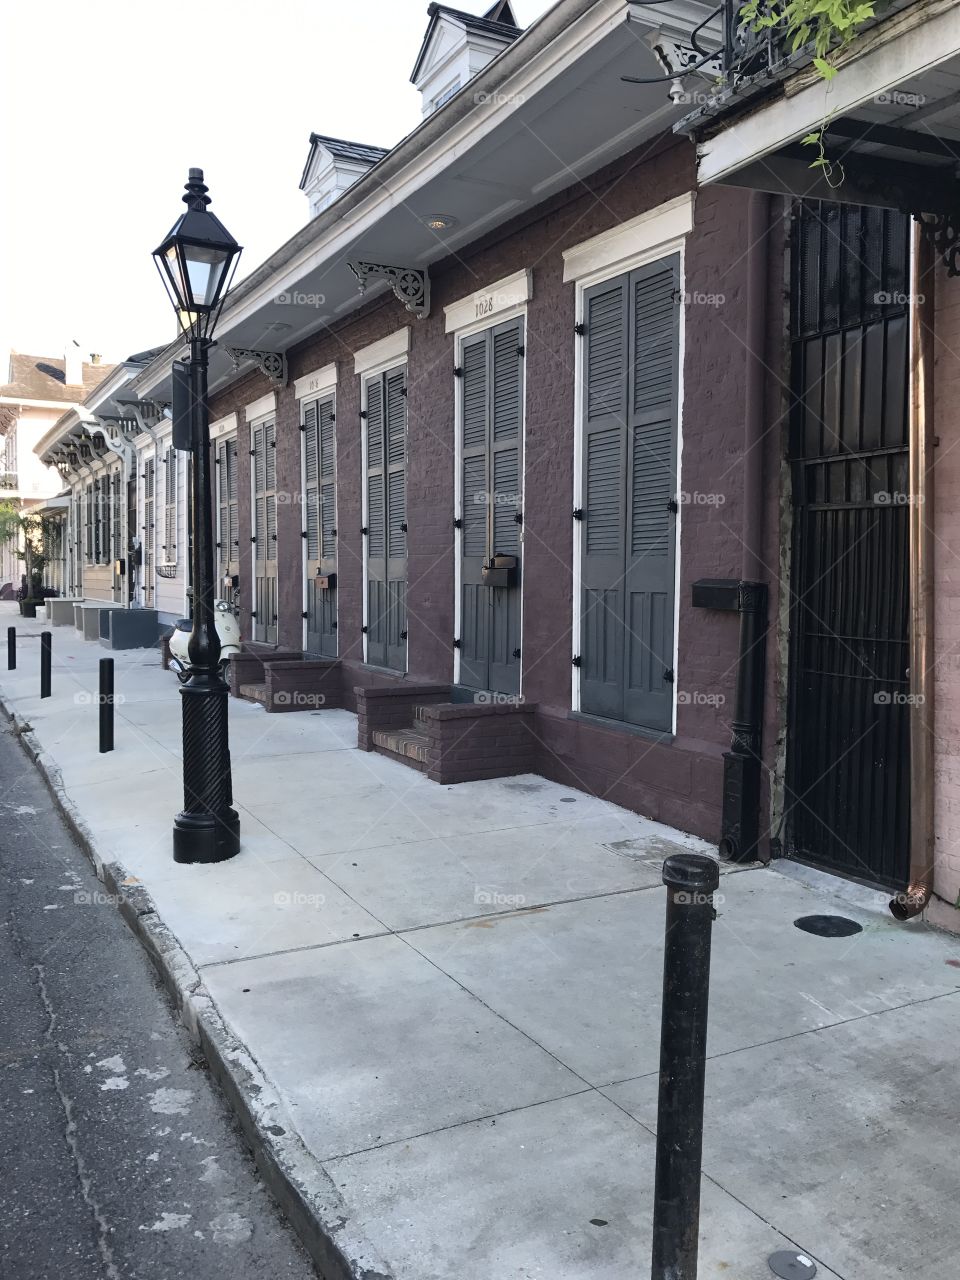 Streets of New Orleans 